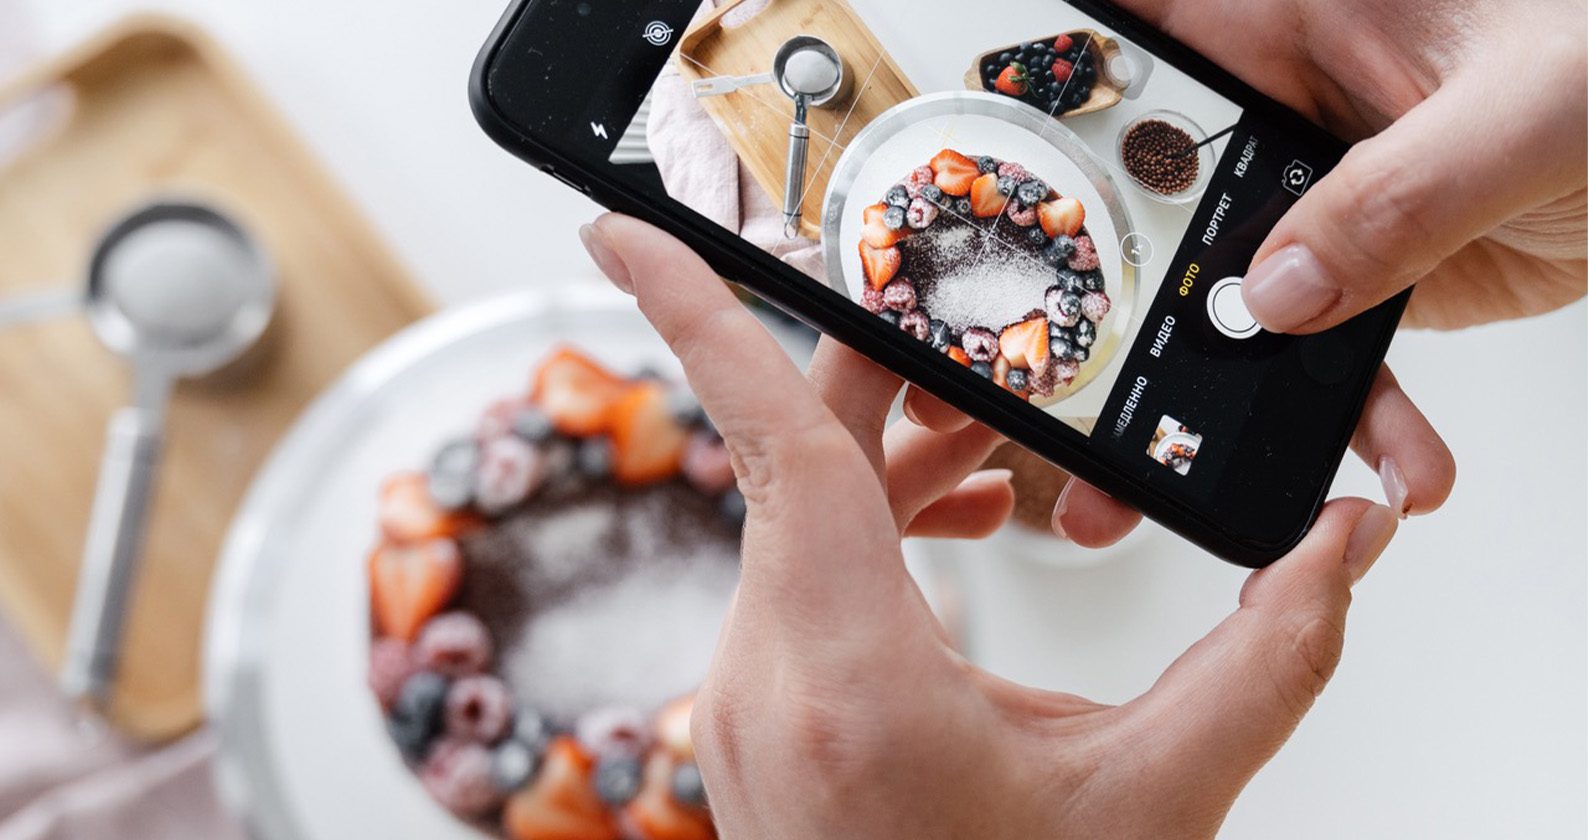 Hands holding a smartphone taking a photo of fruit on a plate.